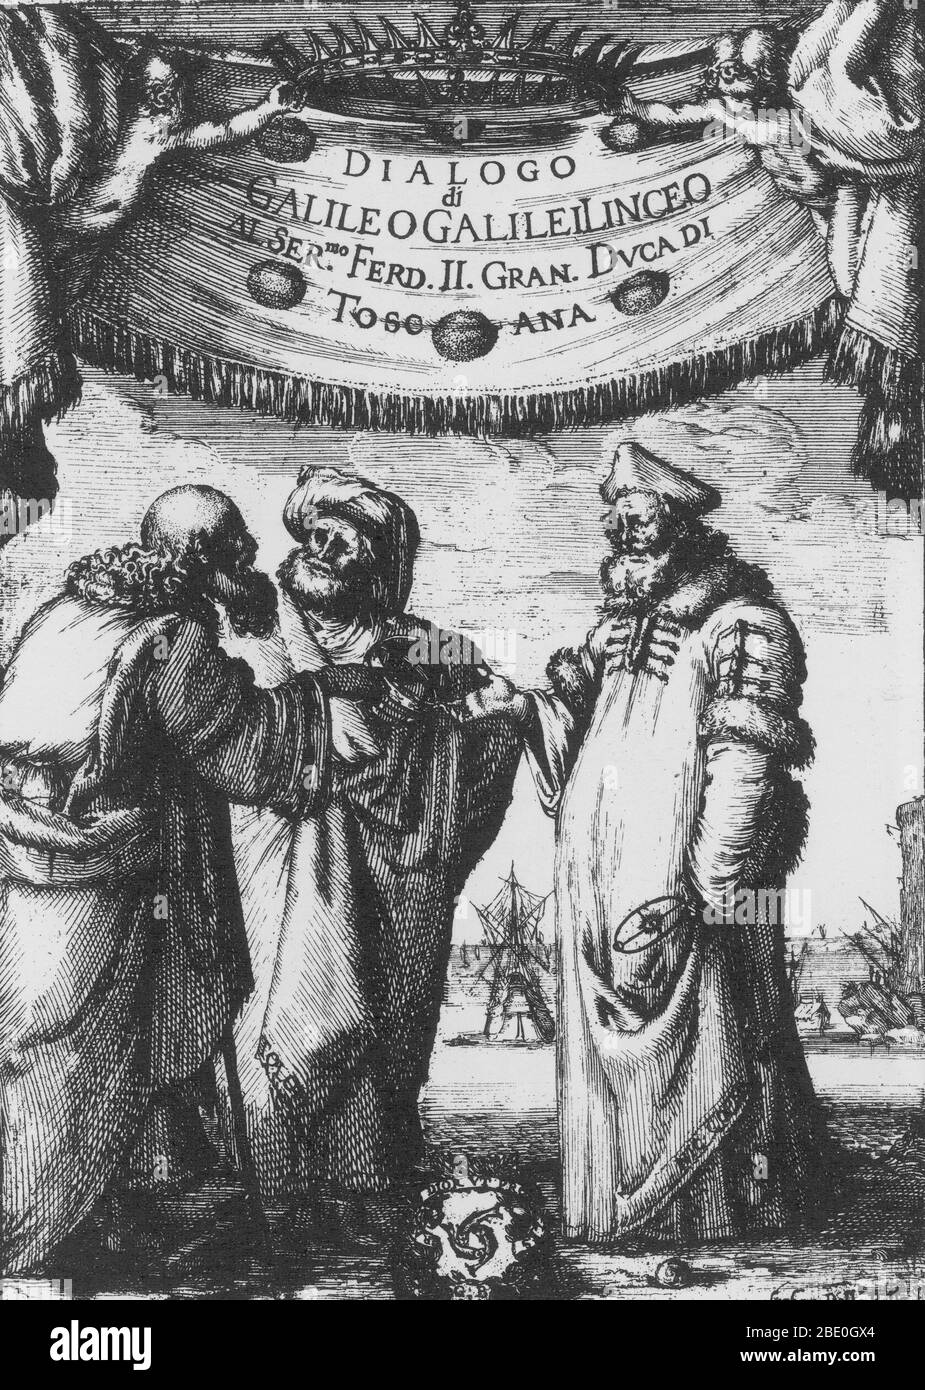 Aristotle, Ptolemy and Copernicus.  Frontispiece etched by Sefano della Bella from Galileo Galilei's Dialogo...sopra i due massimi sistemi del mondo  (Dialogue Concerning the Two Chief World Systems), published in Florence by Giovannie Batista Landini, 1632.  Aristotle (384 BC - 322 BC) was a Greek philosopher known as the founder of logic.  He had a geocentric view of the heavens that consisted of 55 concentric and crystalline spheres.  Ptolemy (c. 85 - 165 AD) was an Egyptian astronomer who devised the Ptolematic system, which held that the Earth was at the center of the universe, with the p Stock Photo